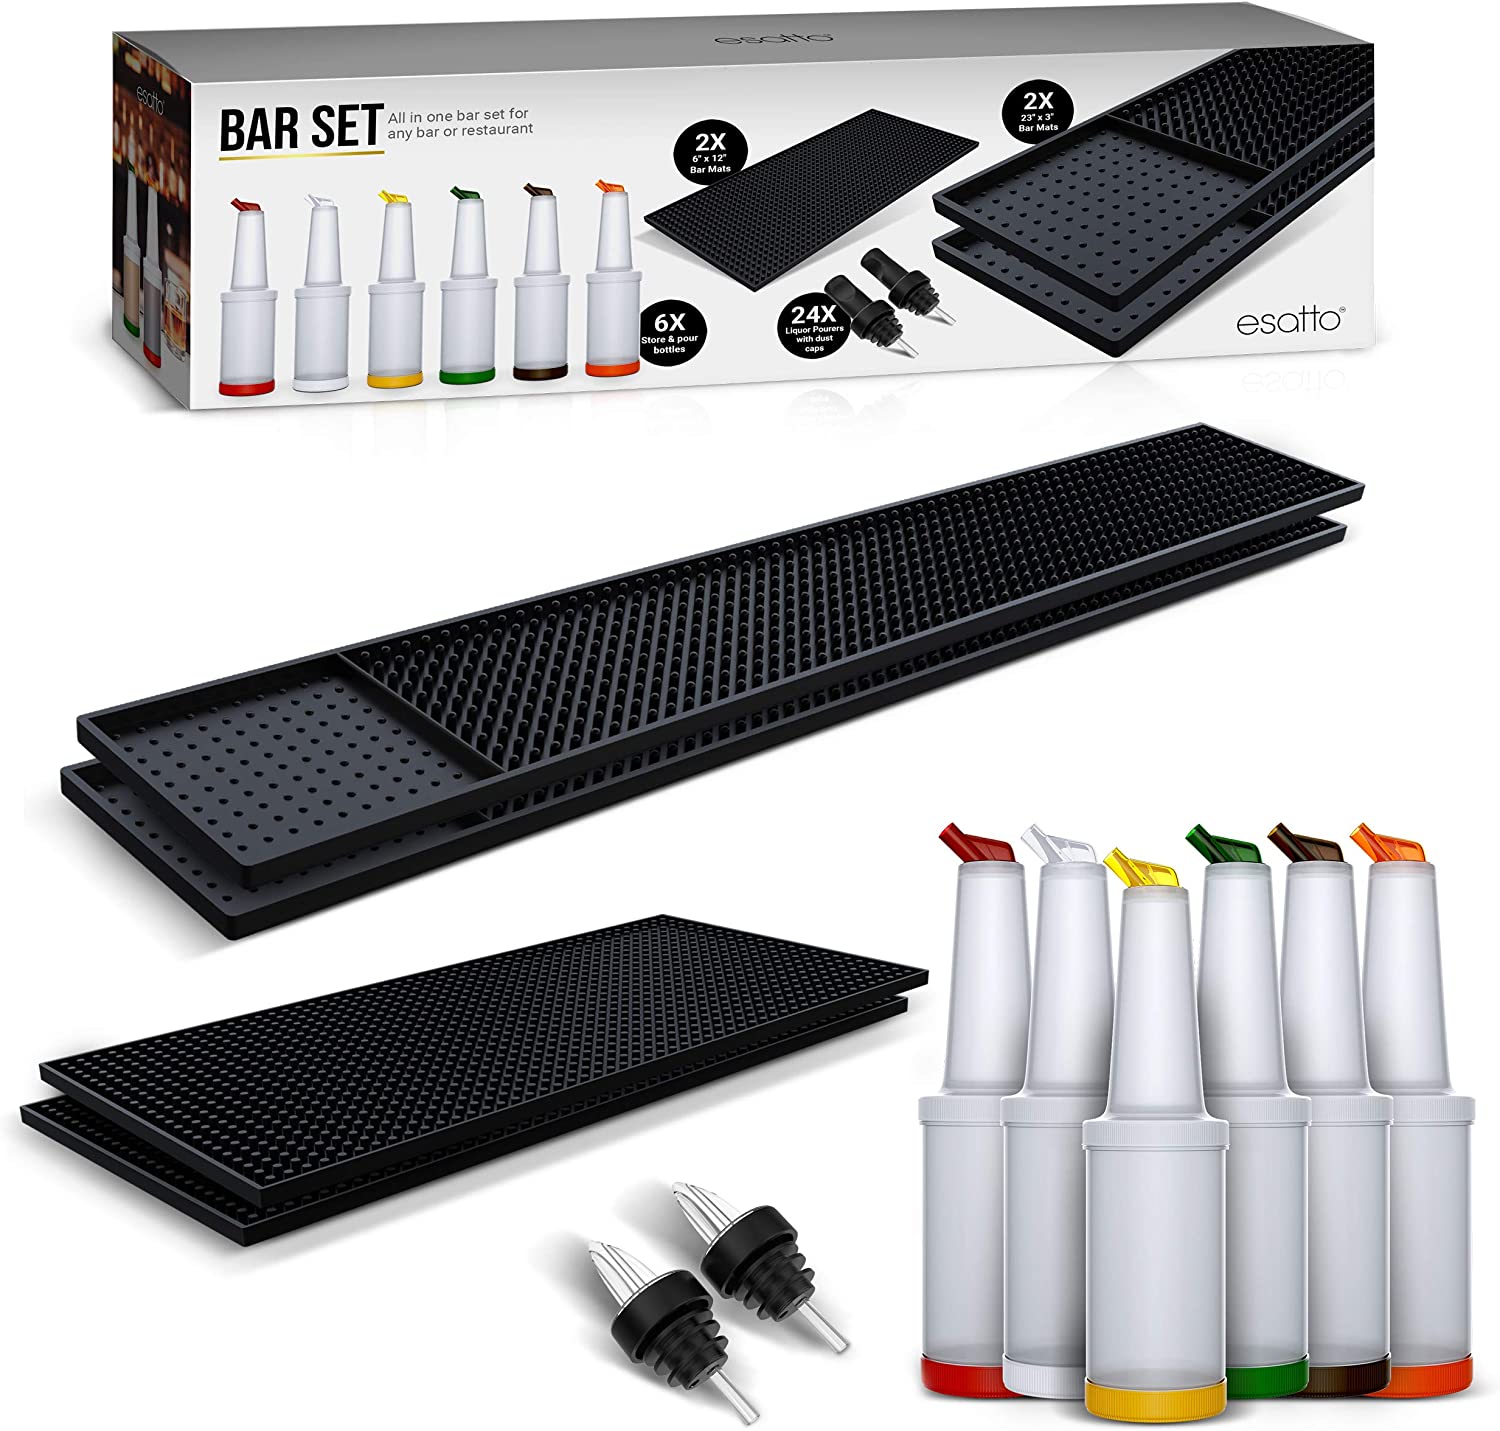 Featured image for “Esatto Bar Equipment Gift Set – 6 Store N Pour Bottles, 2 Bar Mats, 2 Shaker Mats, 24 Pourers with dust caps”